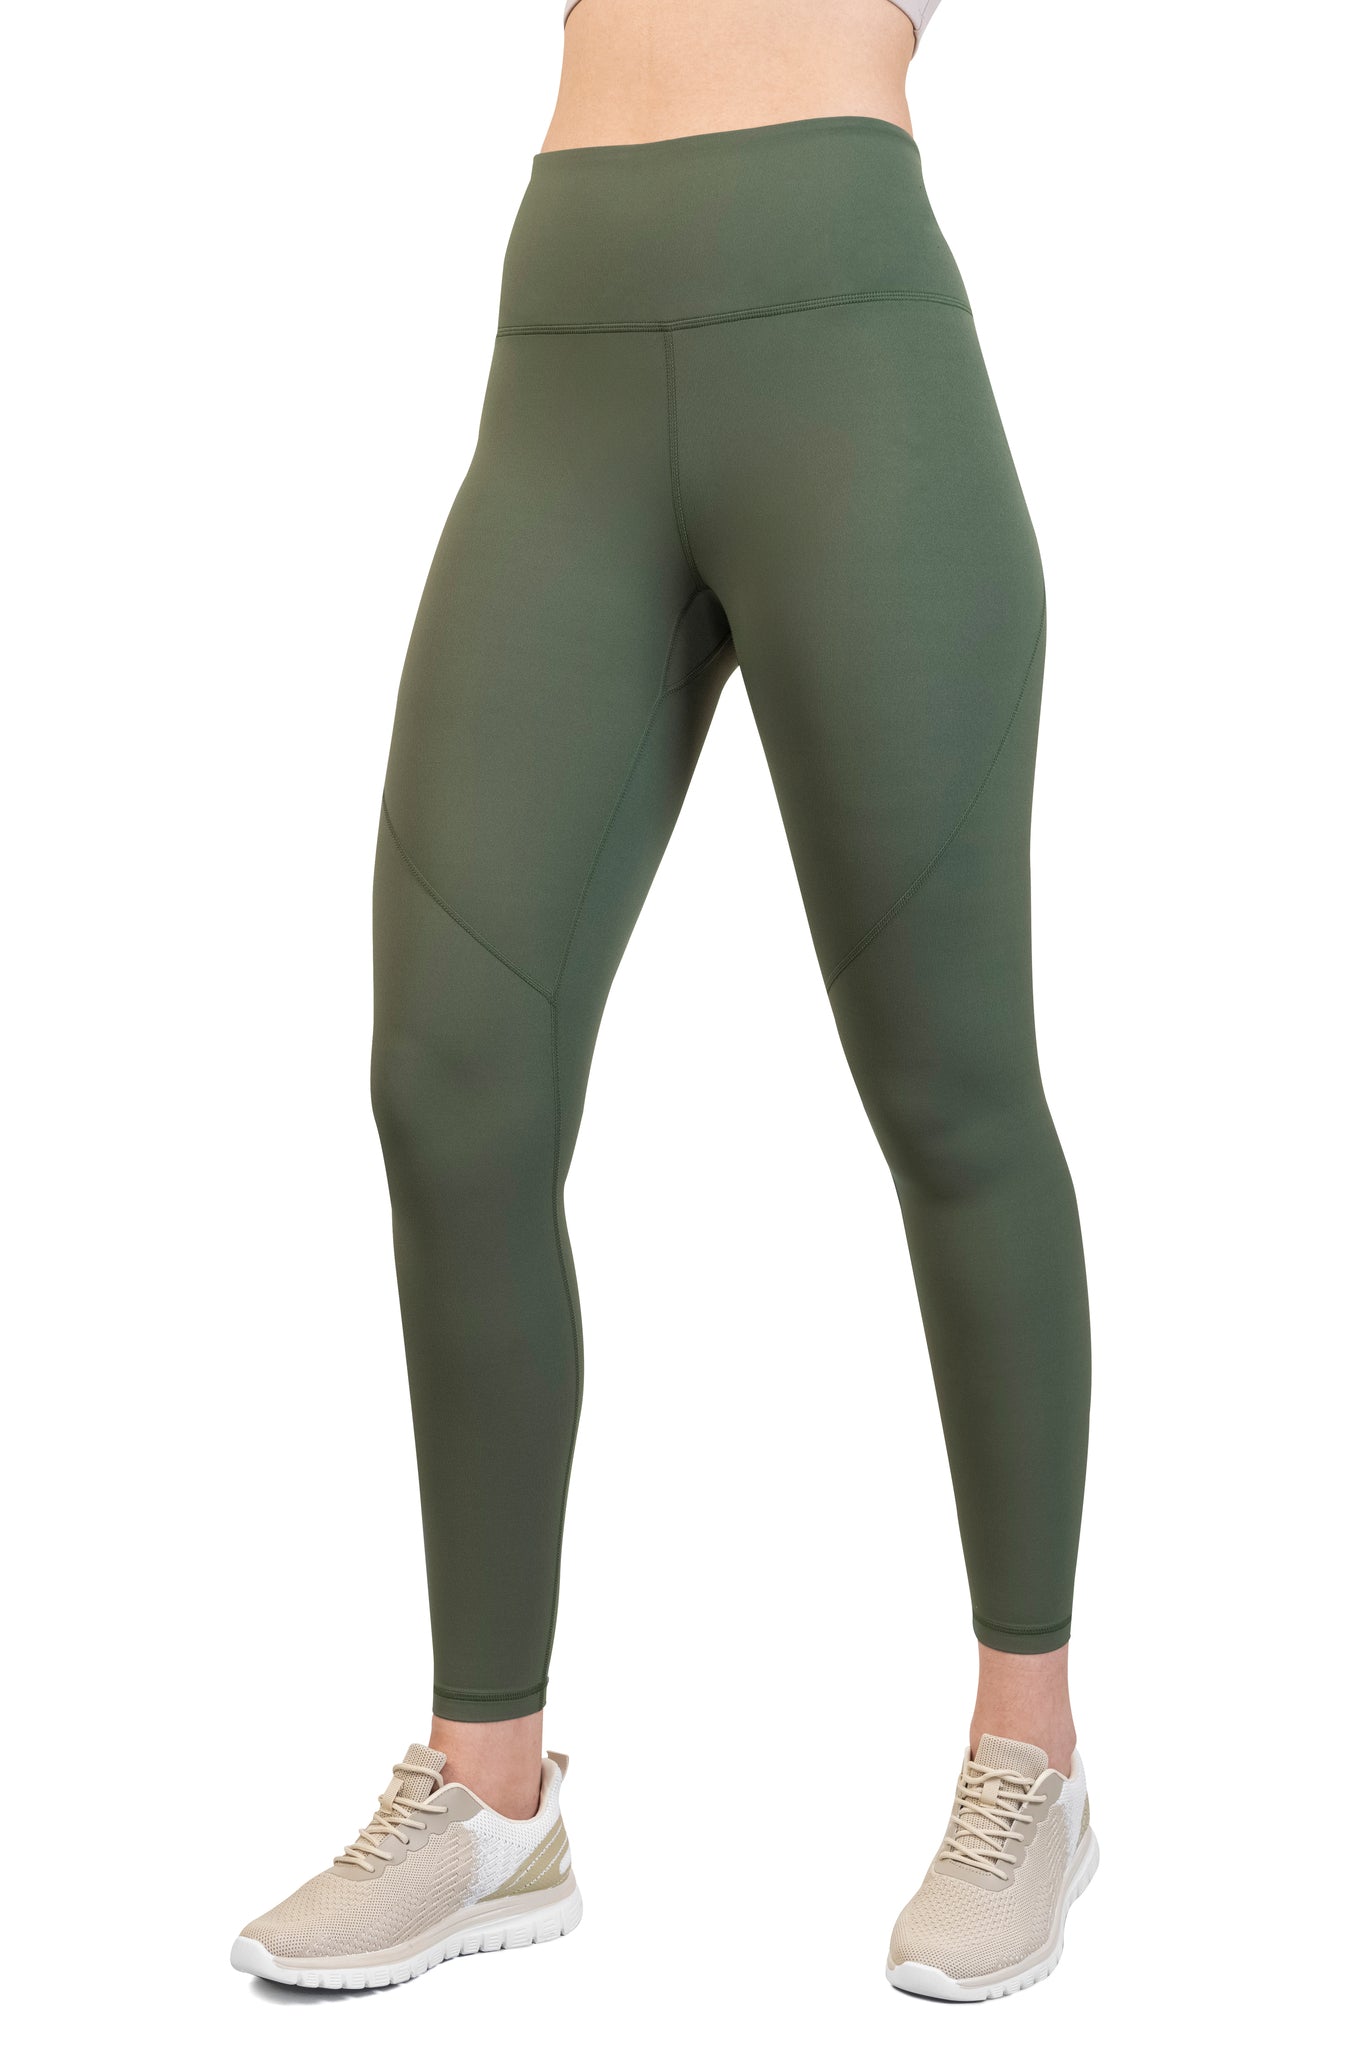 Four way stretch, sweat wicking leggings olive for gym, workouts, gym and leisure